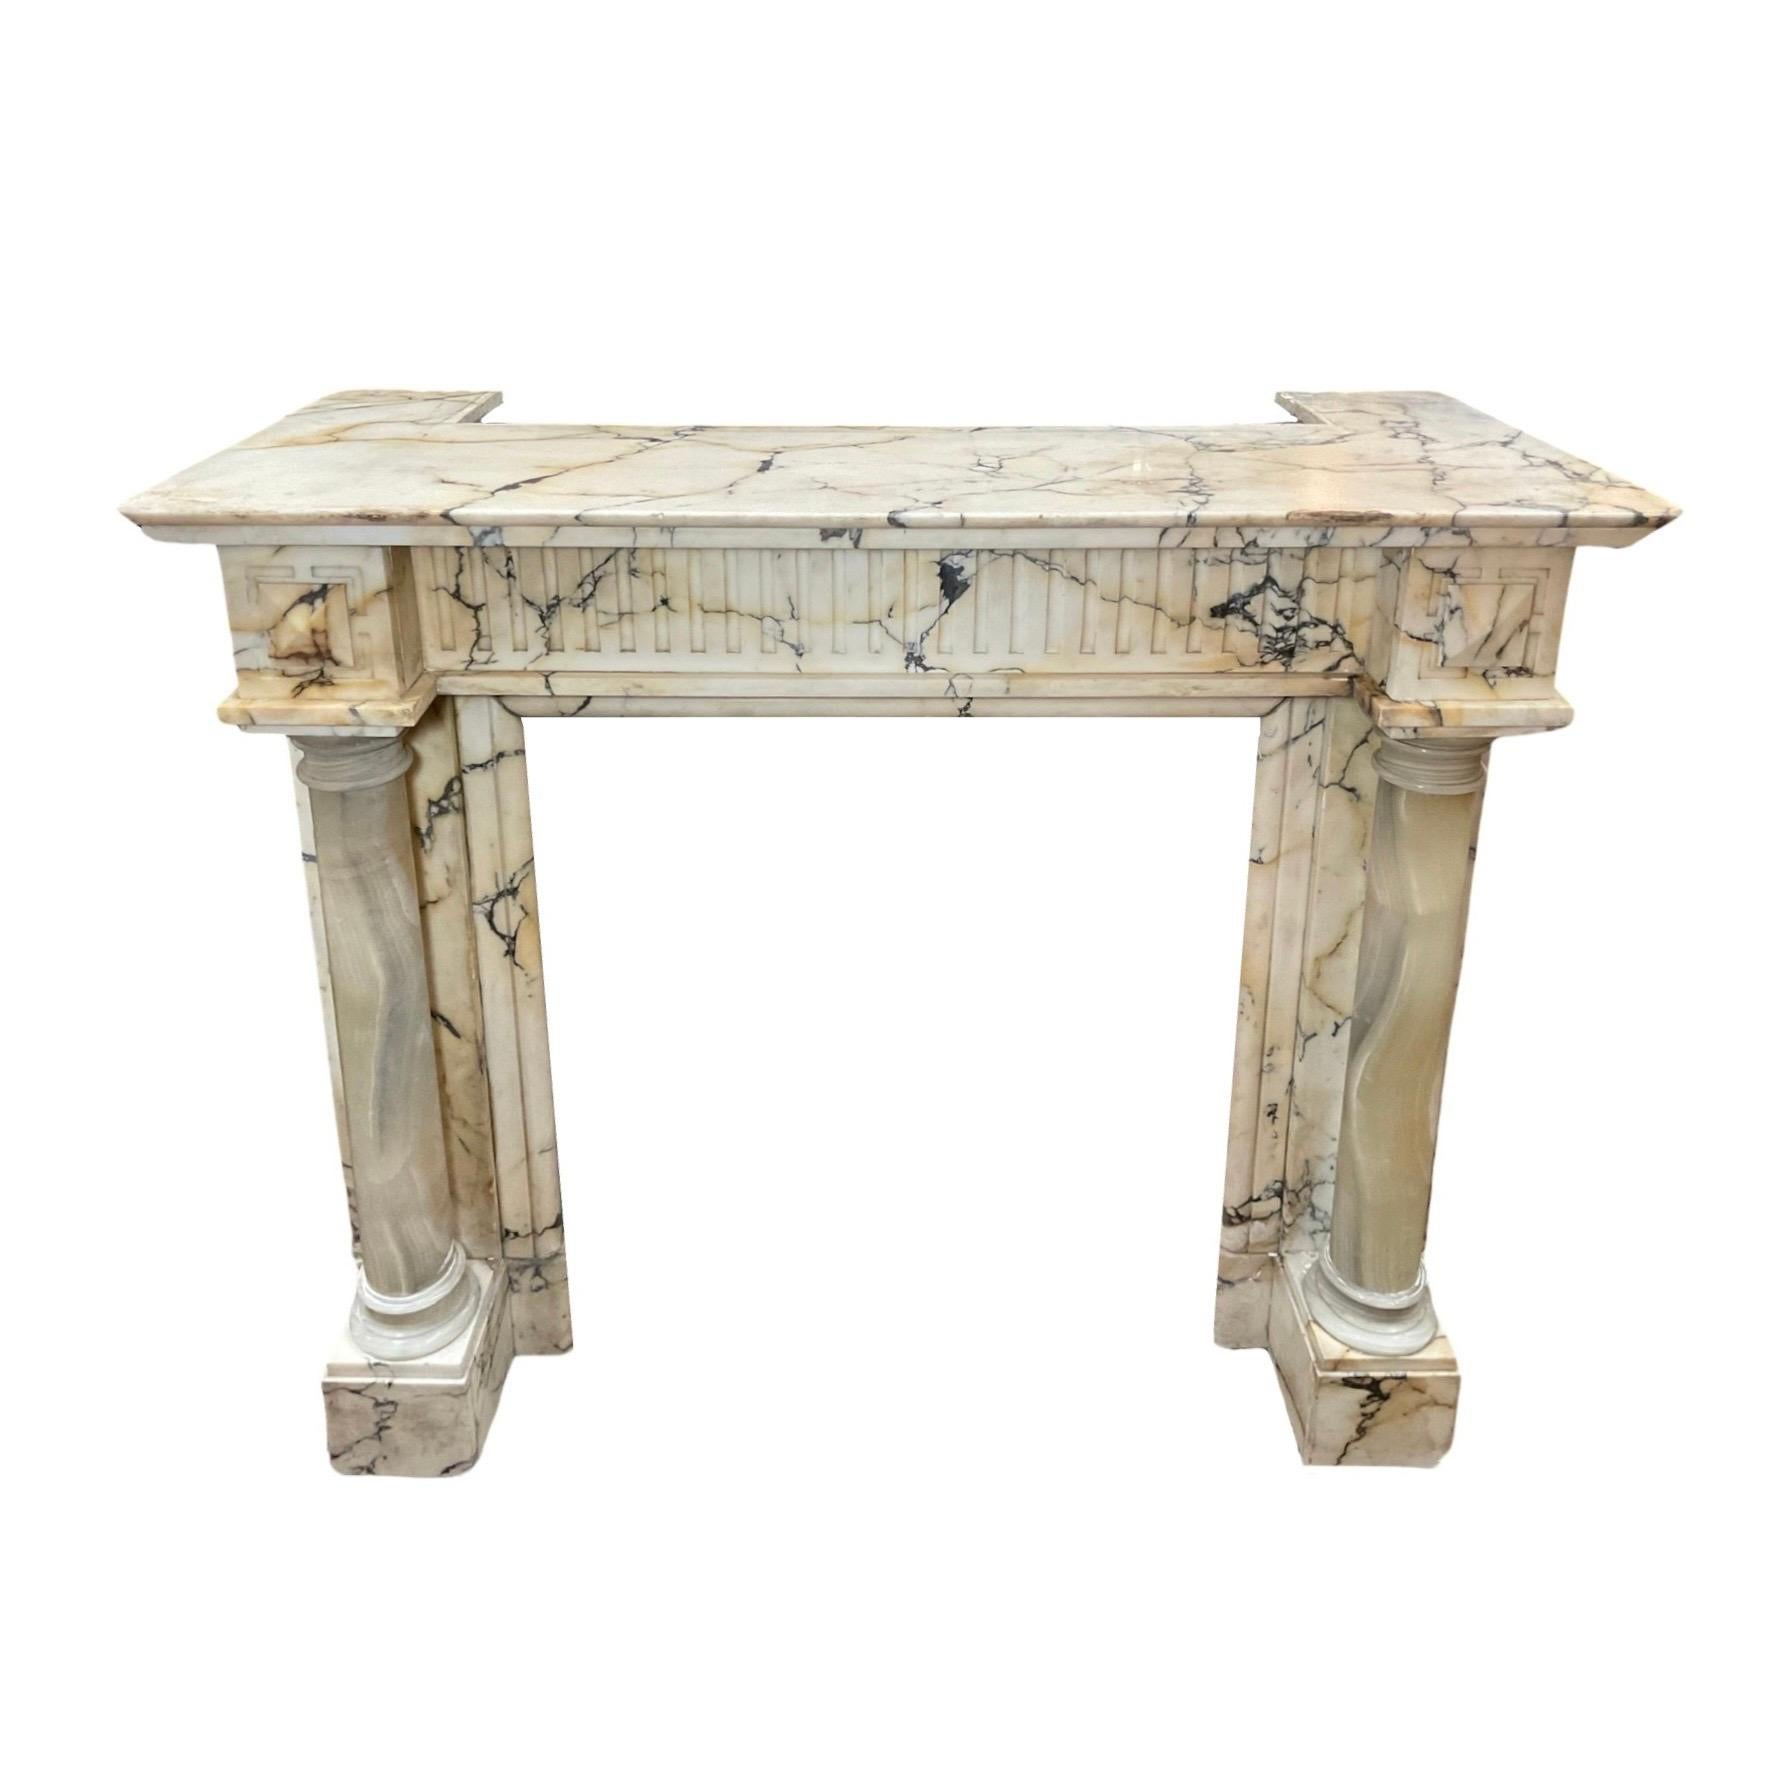 This exquisite Italian mantel, crafted out of Calacatta marble from the 1860s, is the perfect addition to any home. Boasting yellow hue that results from the aged marble, the mantel adorns onyx stone legs for added elegance. Add timeless beauty to